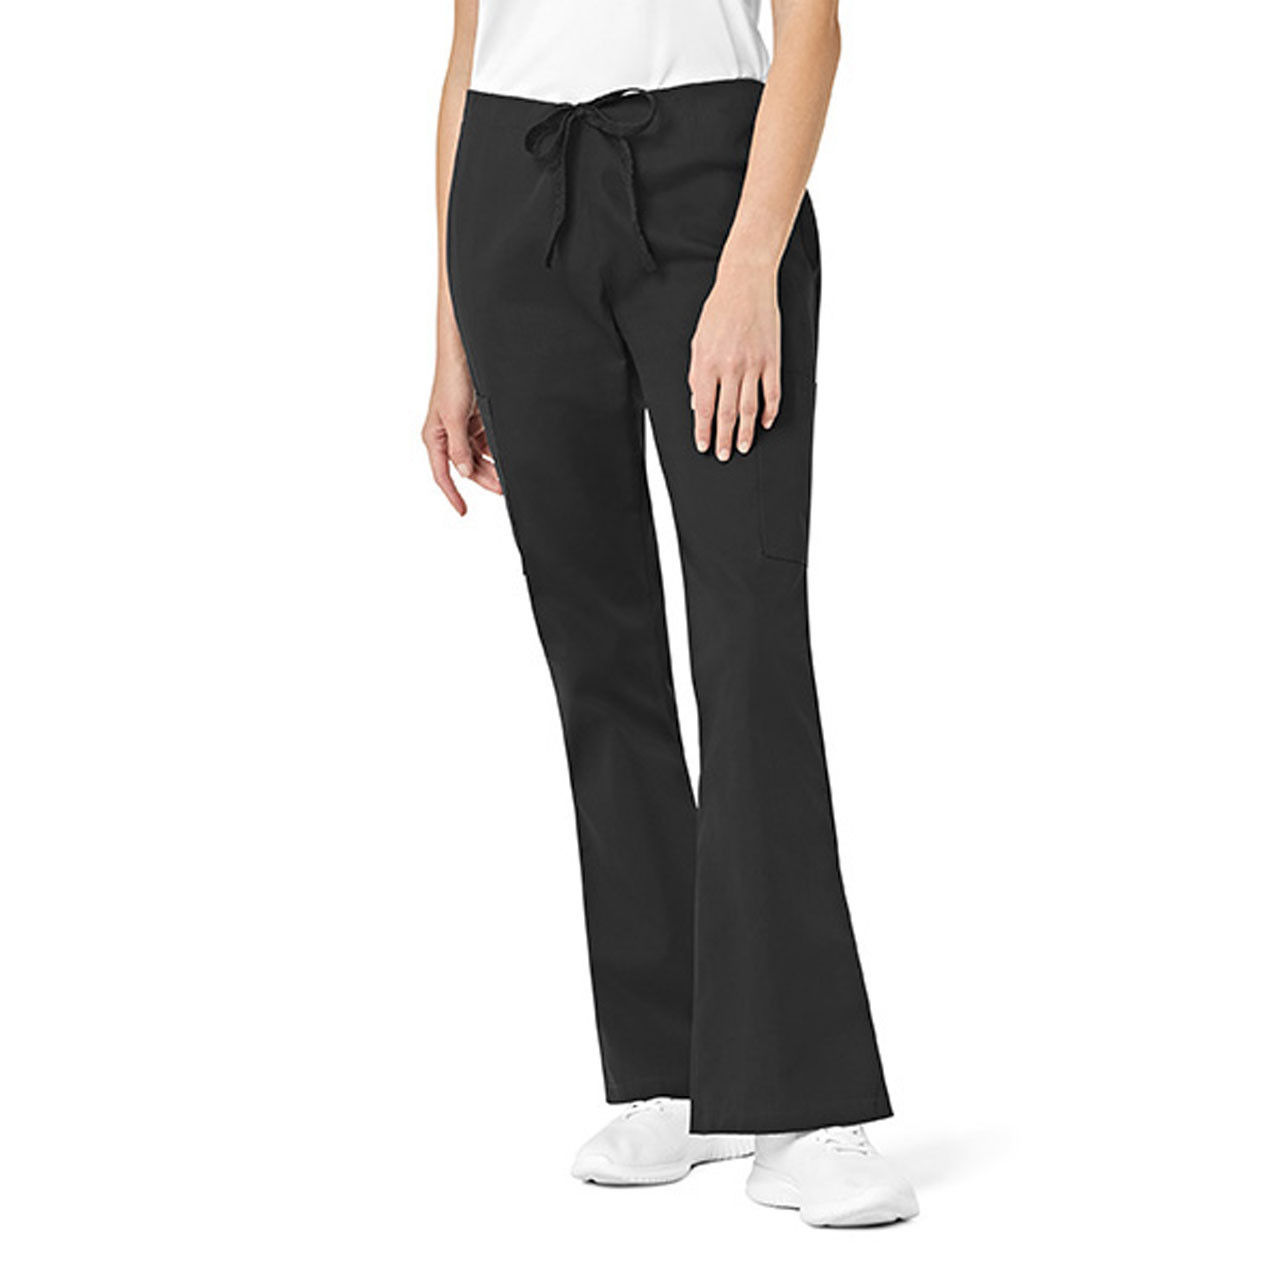 What material are the Women's Black Flare Cargo Pants made of?